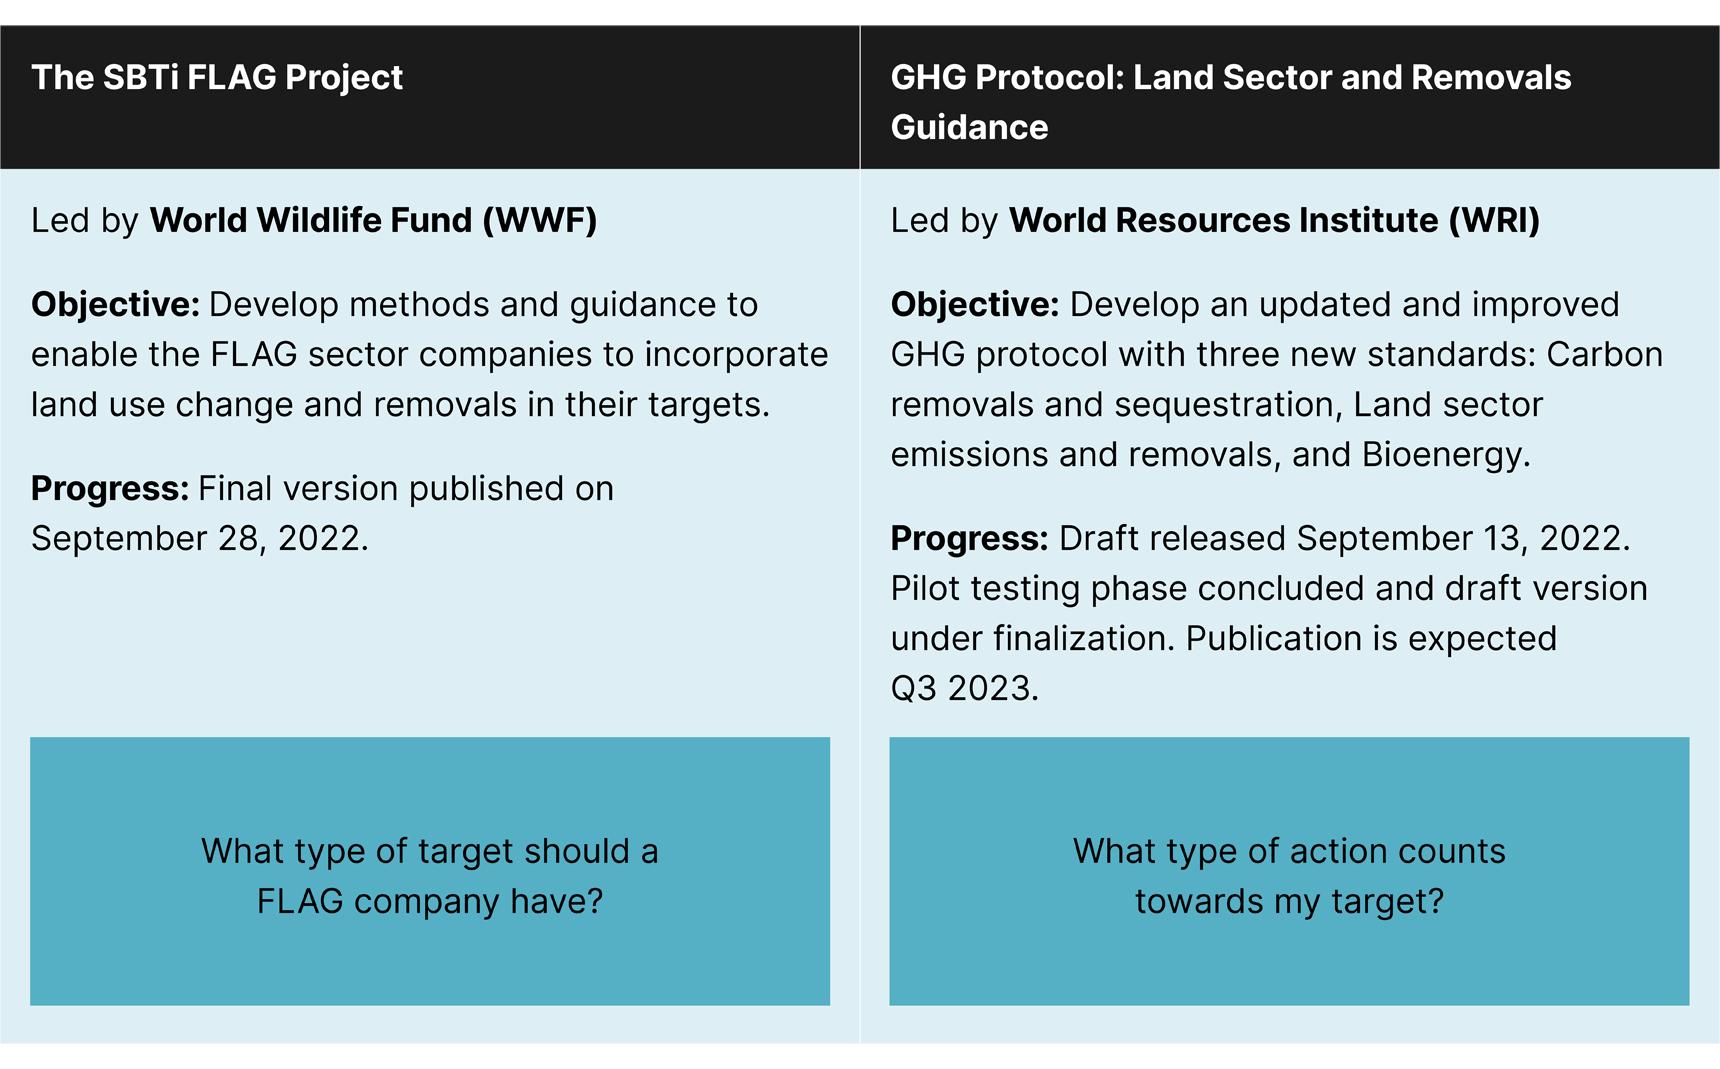 Summary of SBTi FLAG project and the GHG Protocol